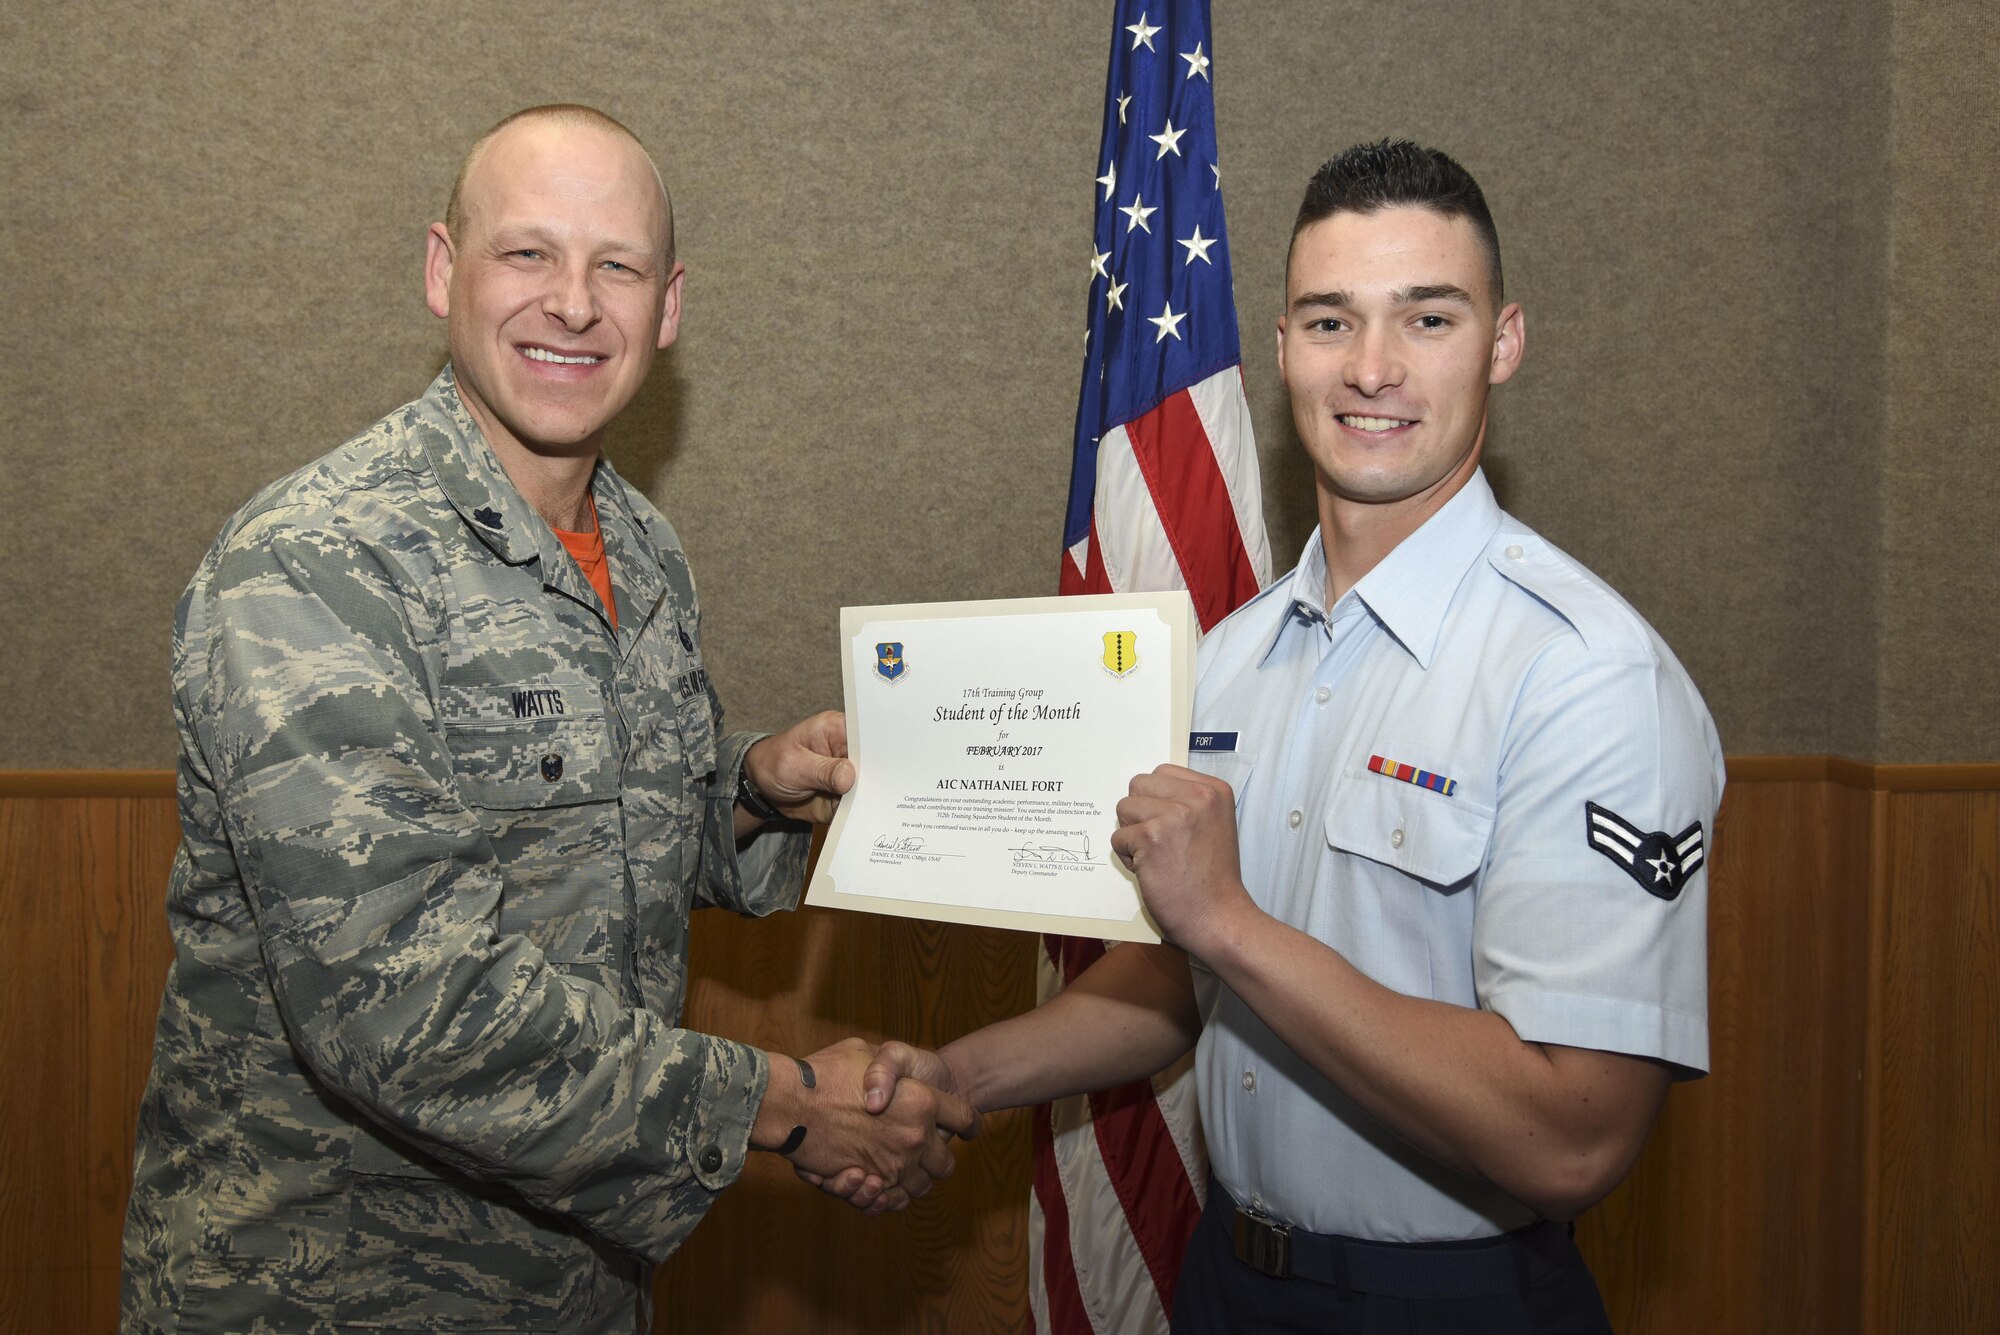 U.S. Air Force Lt. Col. Steven Watts, 17th Training Group deputy commander, presents the 312th Training Squadron Student of the Month award for Febuary 2017 to Airman 1st Class Nathaniel Fort, 312th TRS student, in the Brandenburg Hall on Goodfellow Air Force Base, Texas, March 3, 2017. (U.S. Air Force photo by Airman 1st Class Chase Sousa/Released)